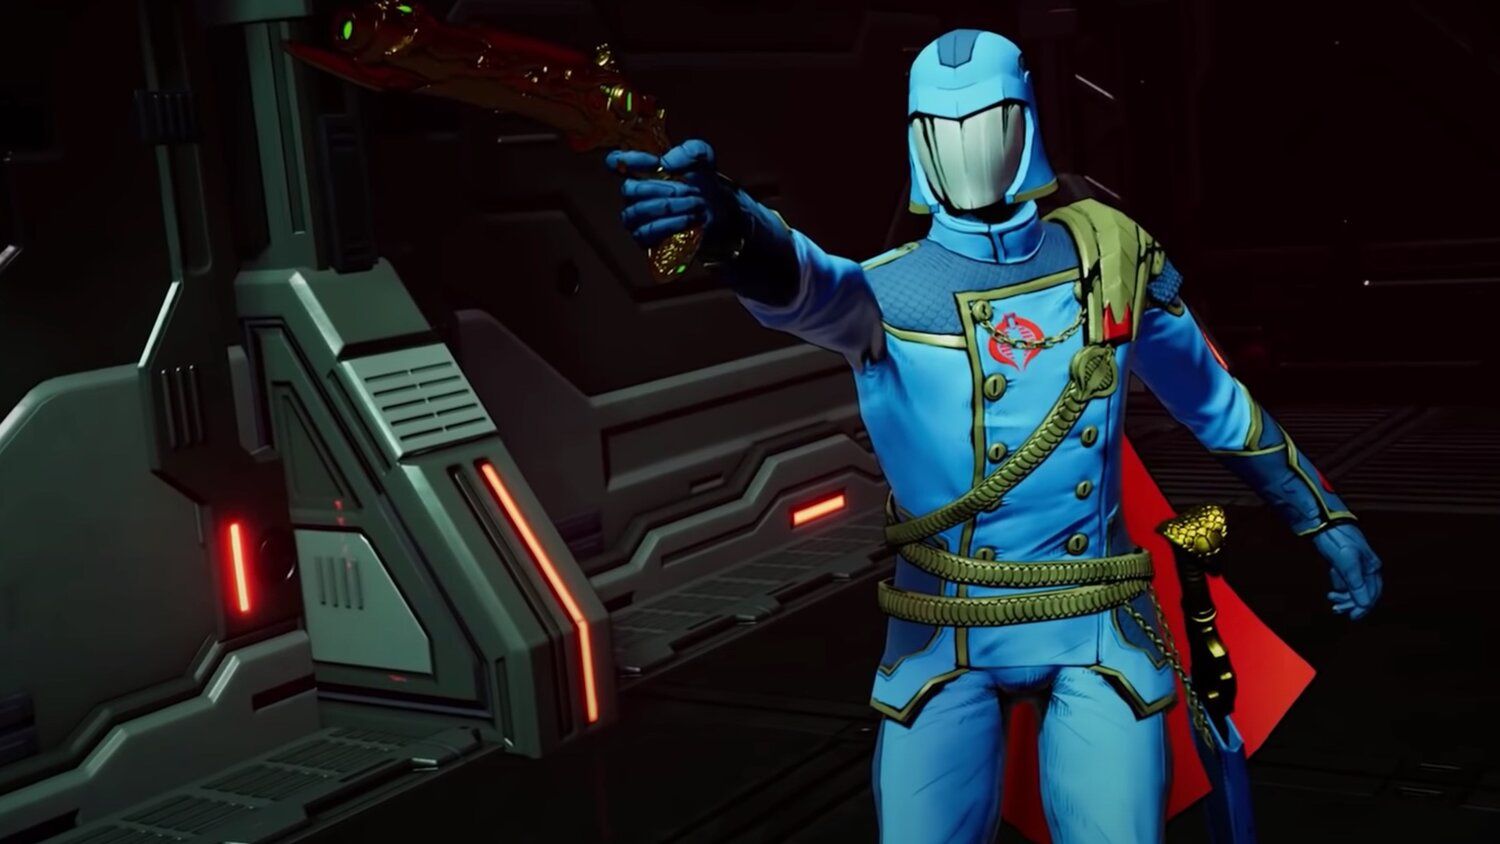 Cool for the Upcoming G.I. JOE: OPERATION BLACKOUT Video Game